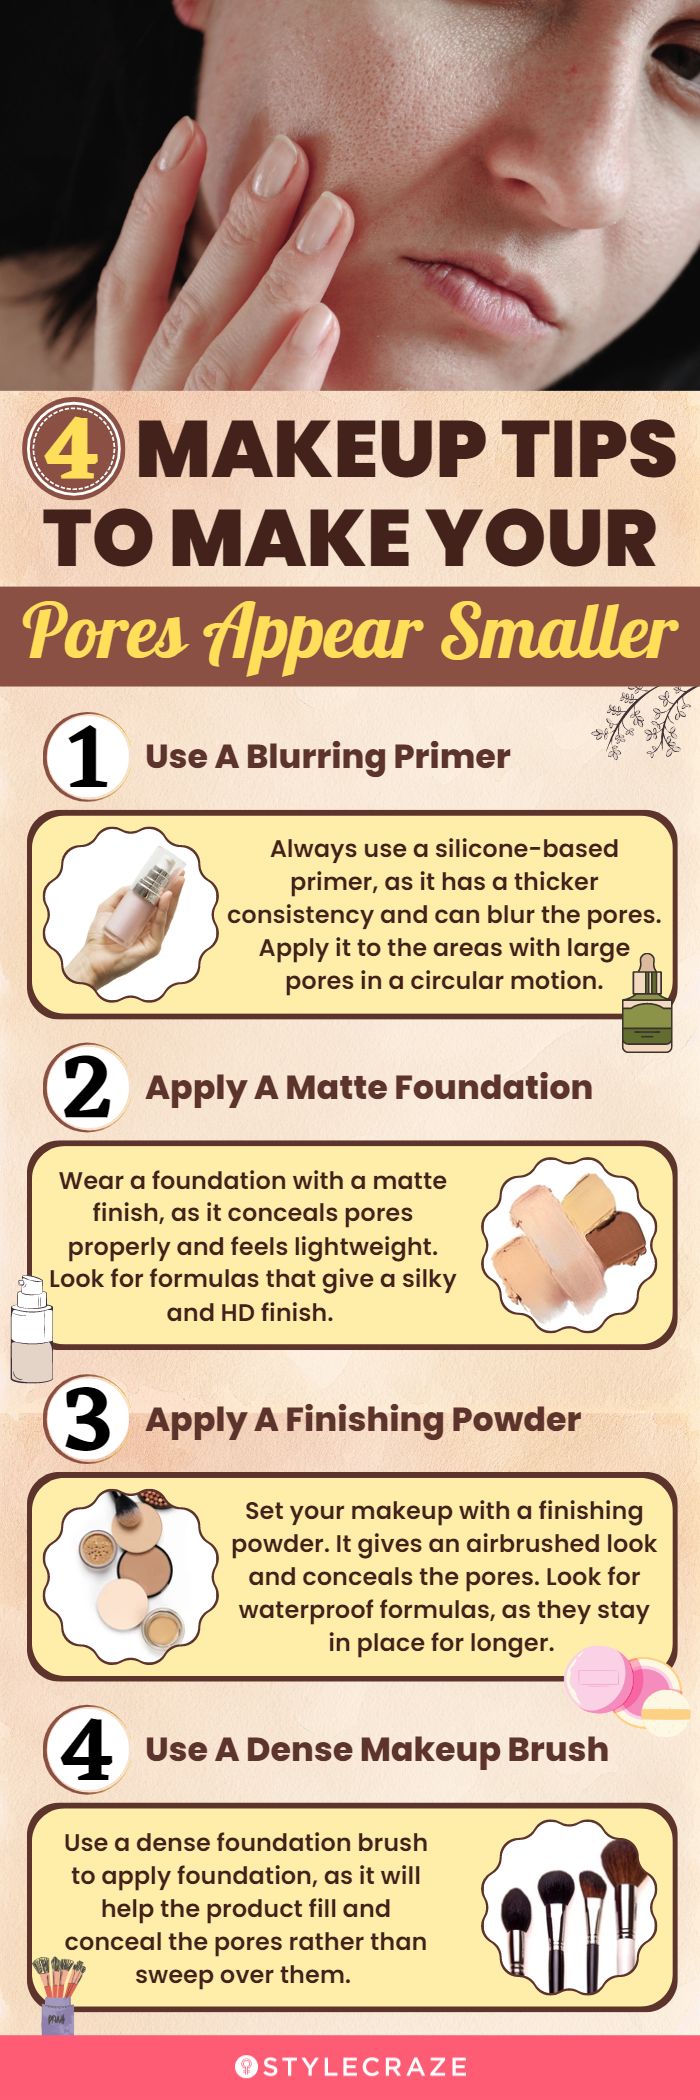 4 makeup tips to make your pores appear smaller (infographic)